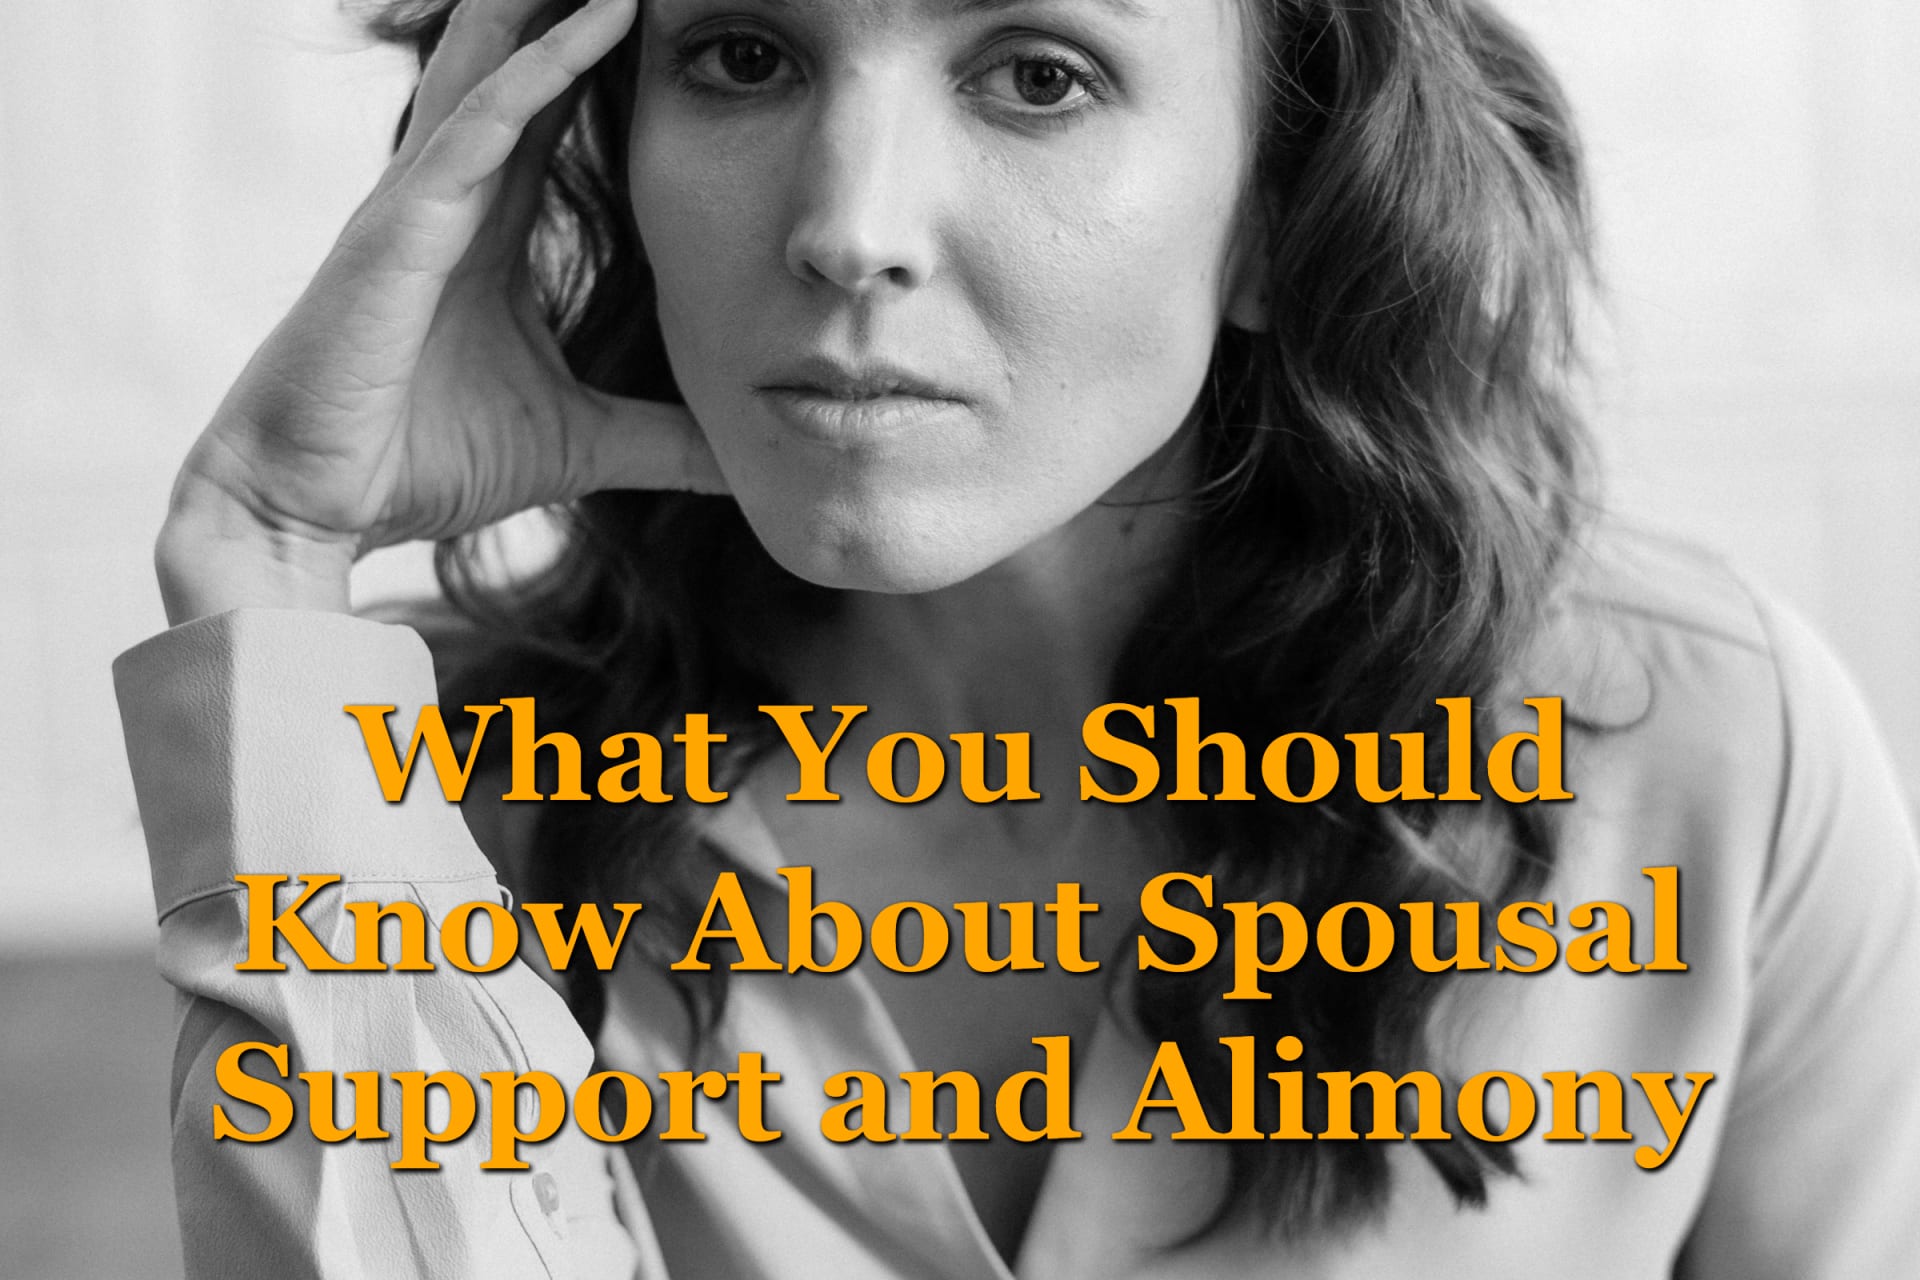 What You Should Know About Spousal Support and Alimony